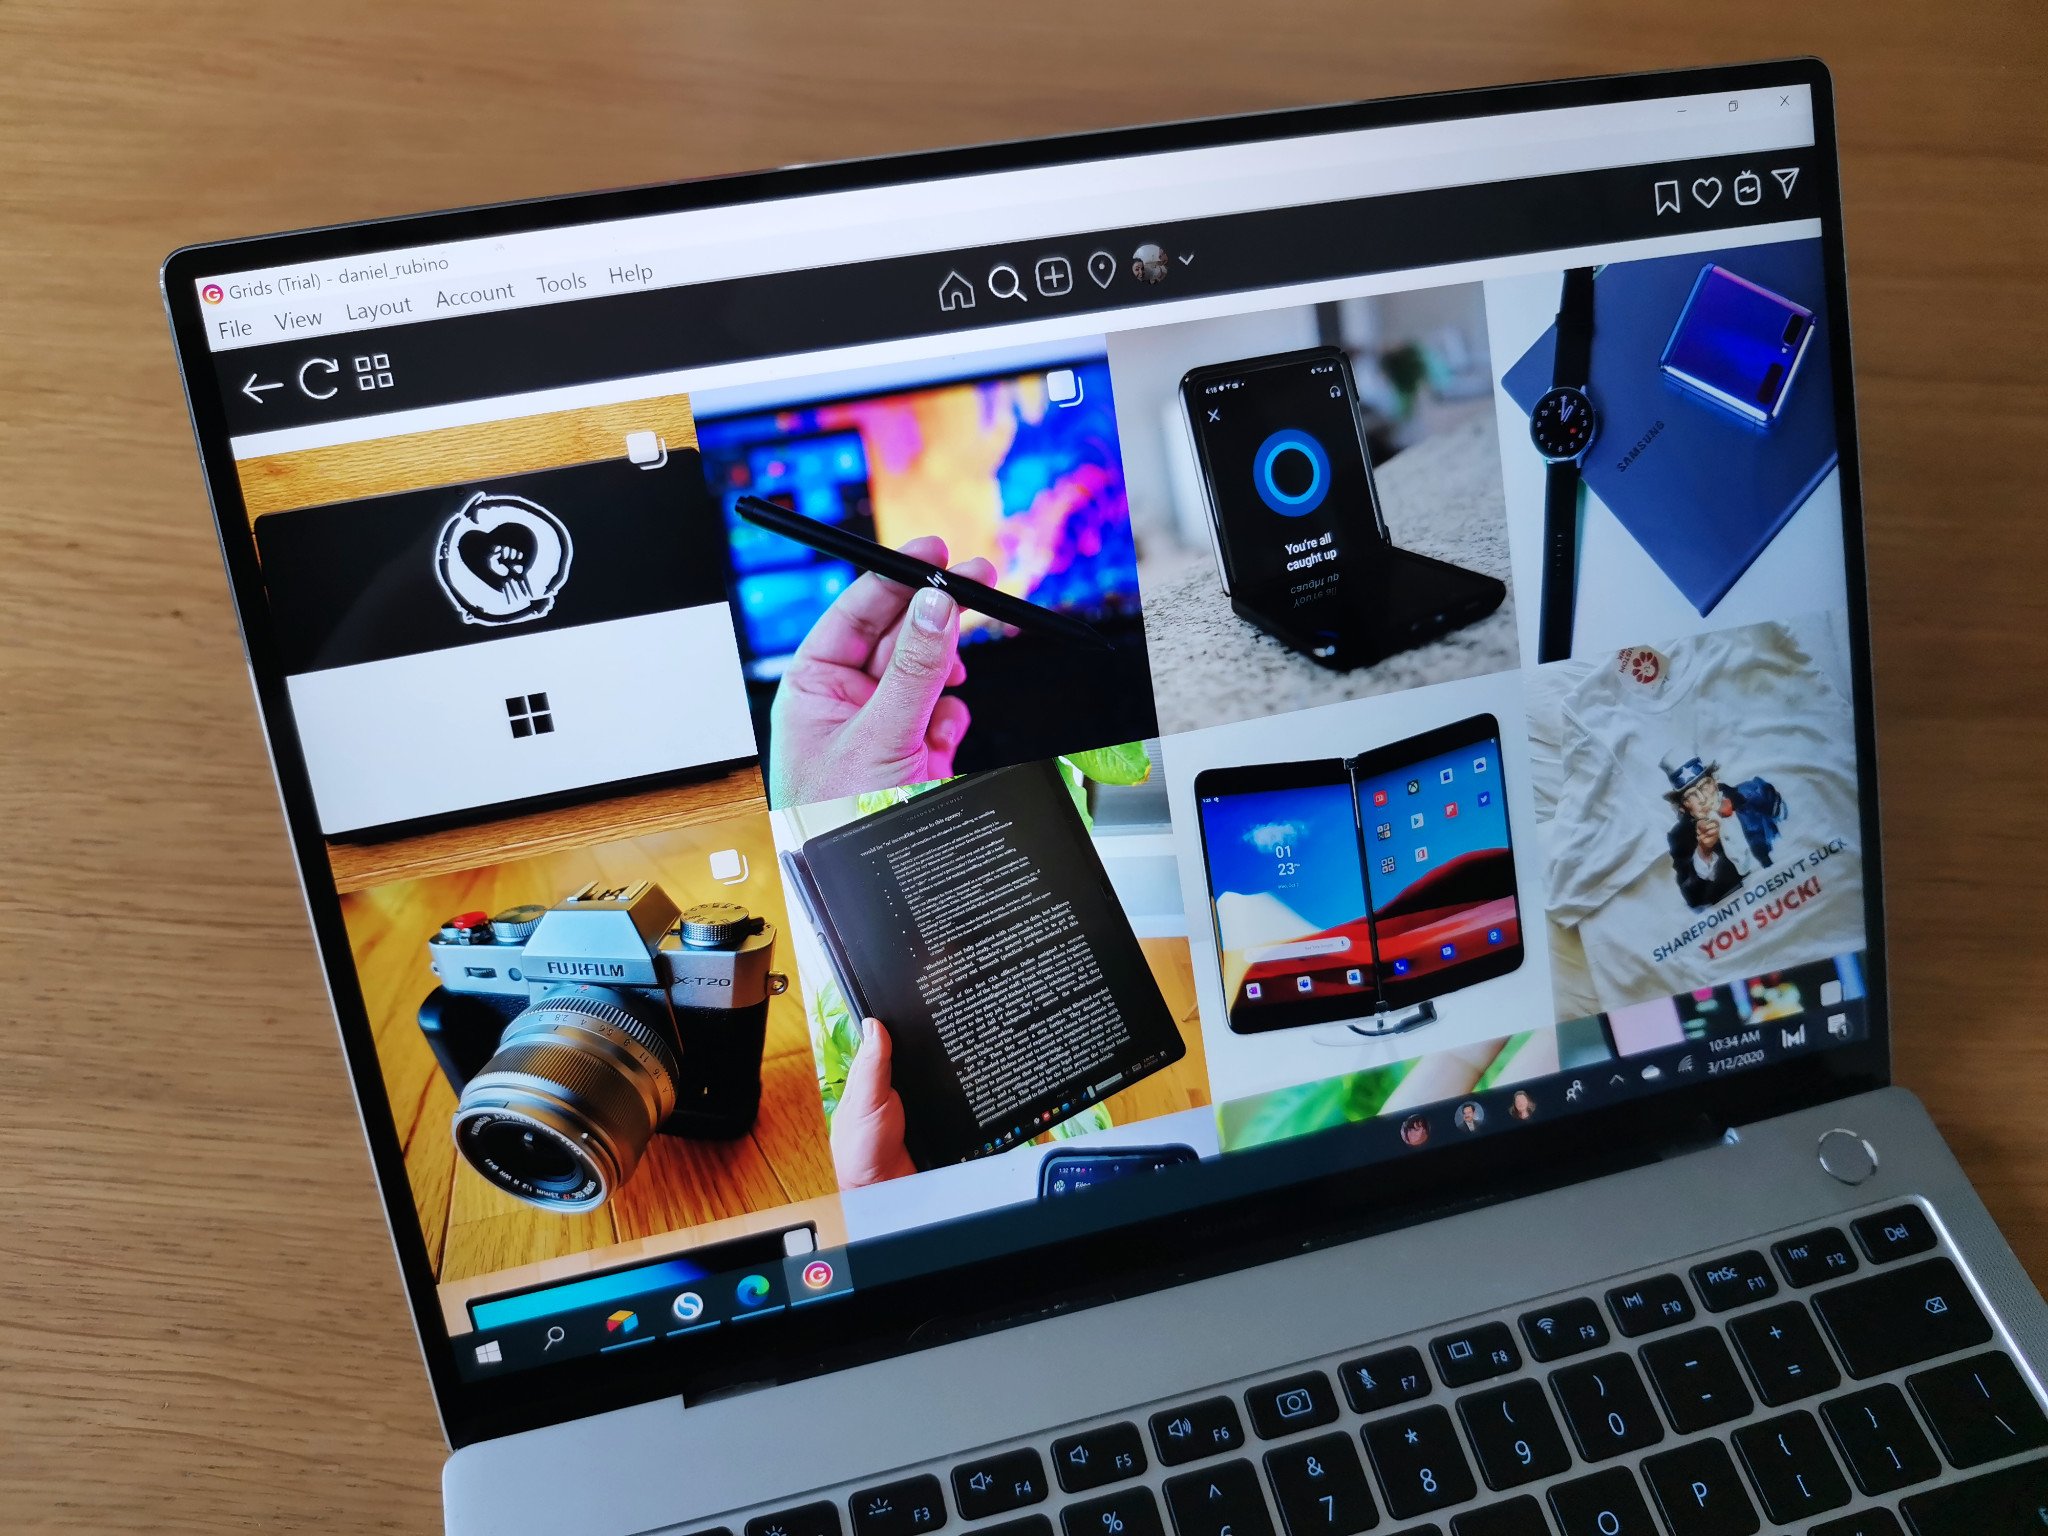 Grids review: An Instagram client for Windows packing serious power |  Windows Central